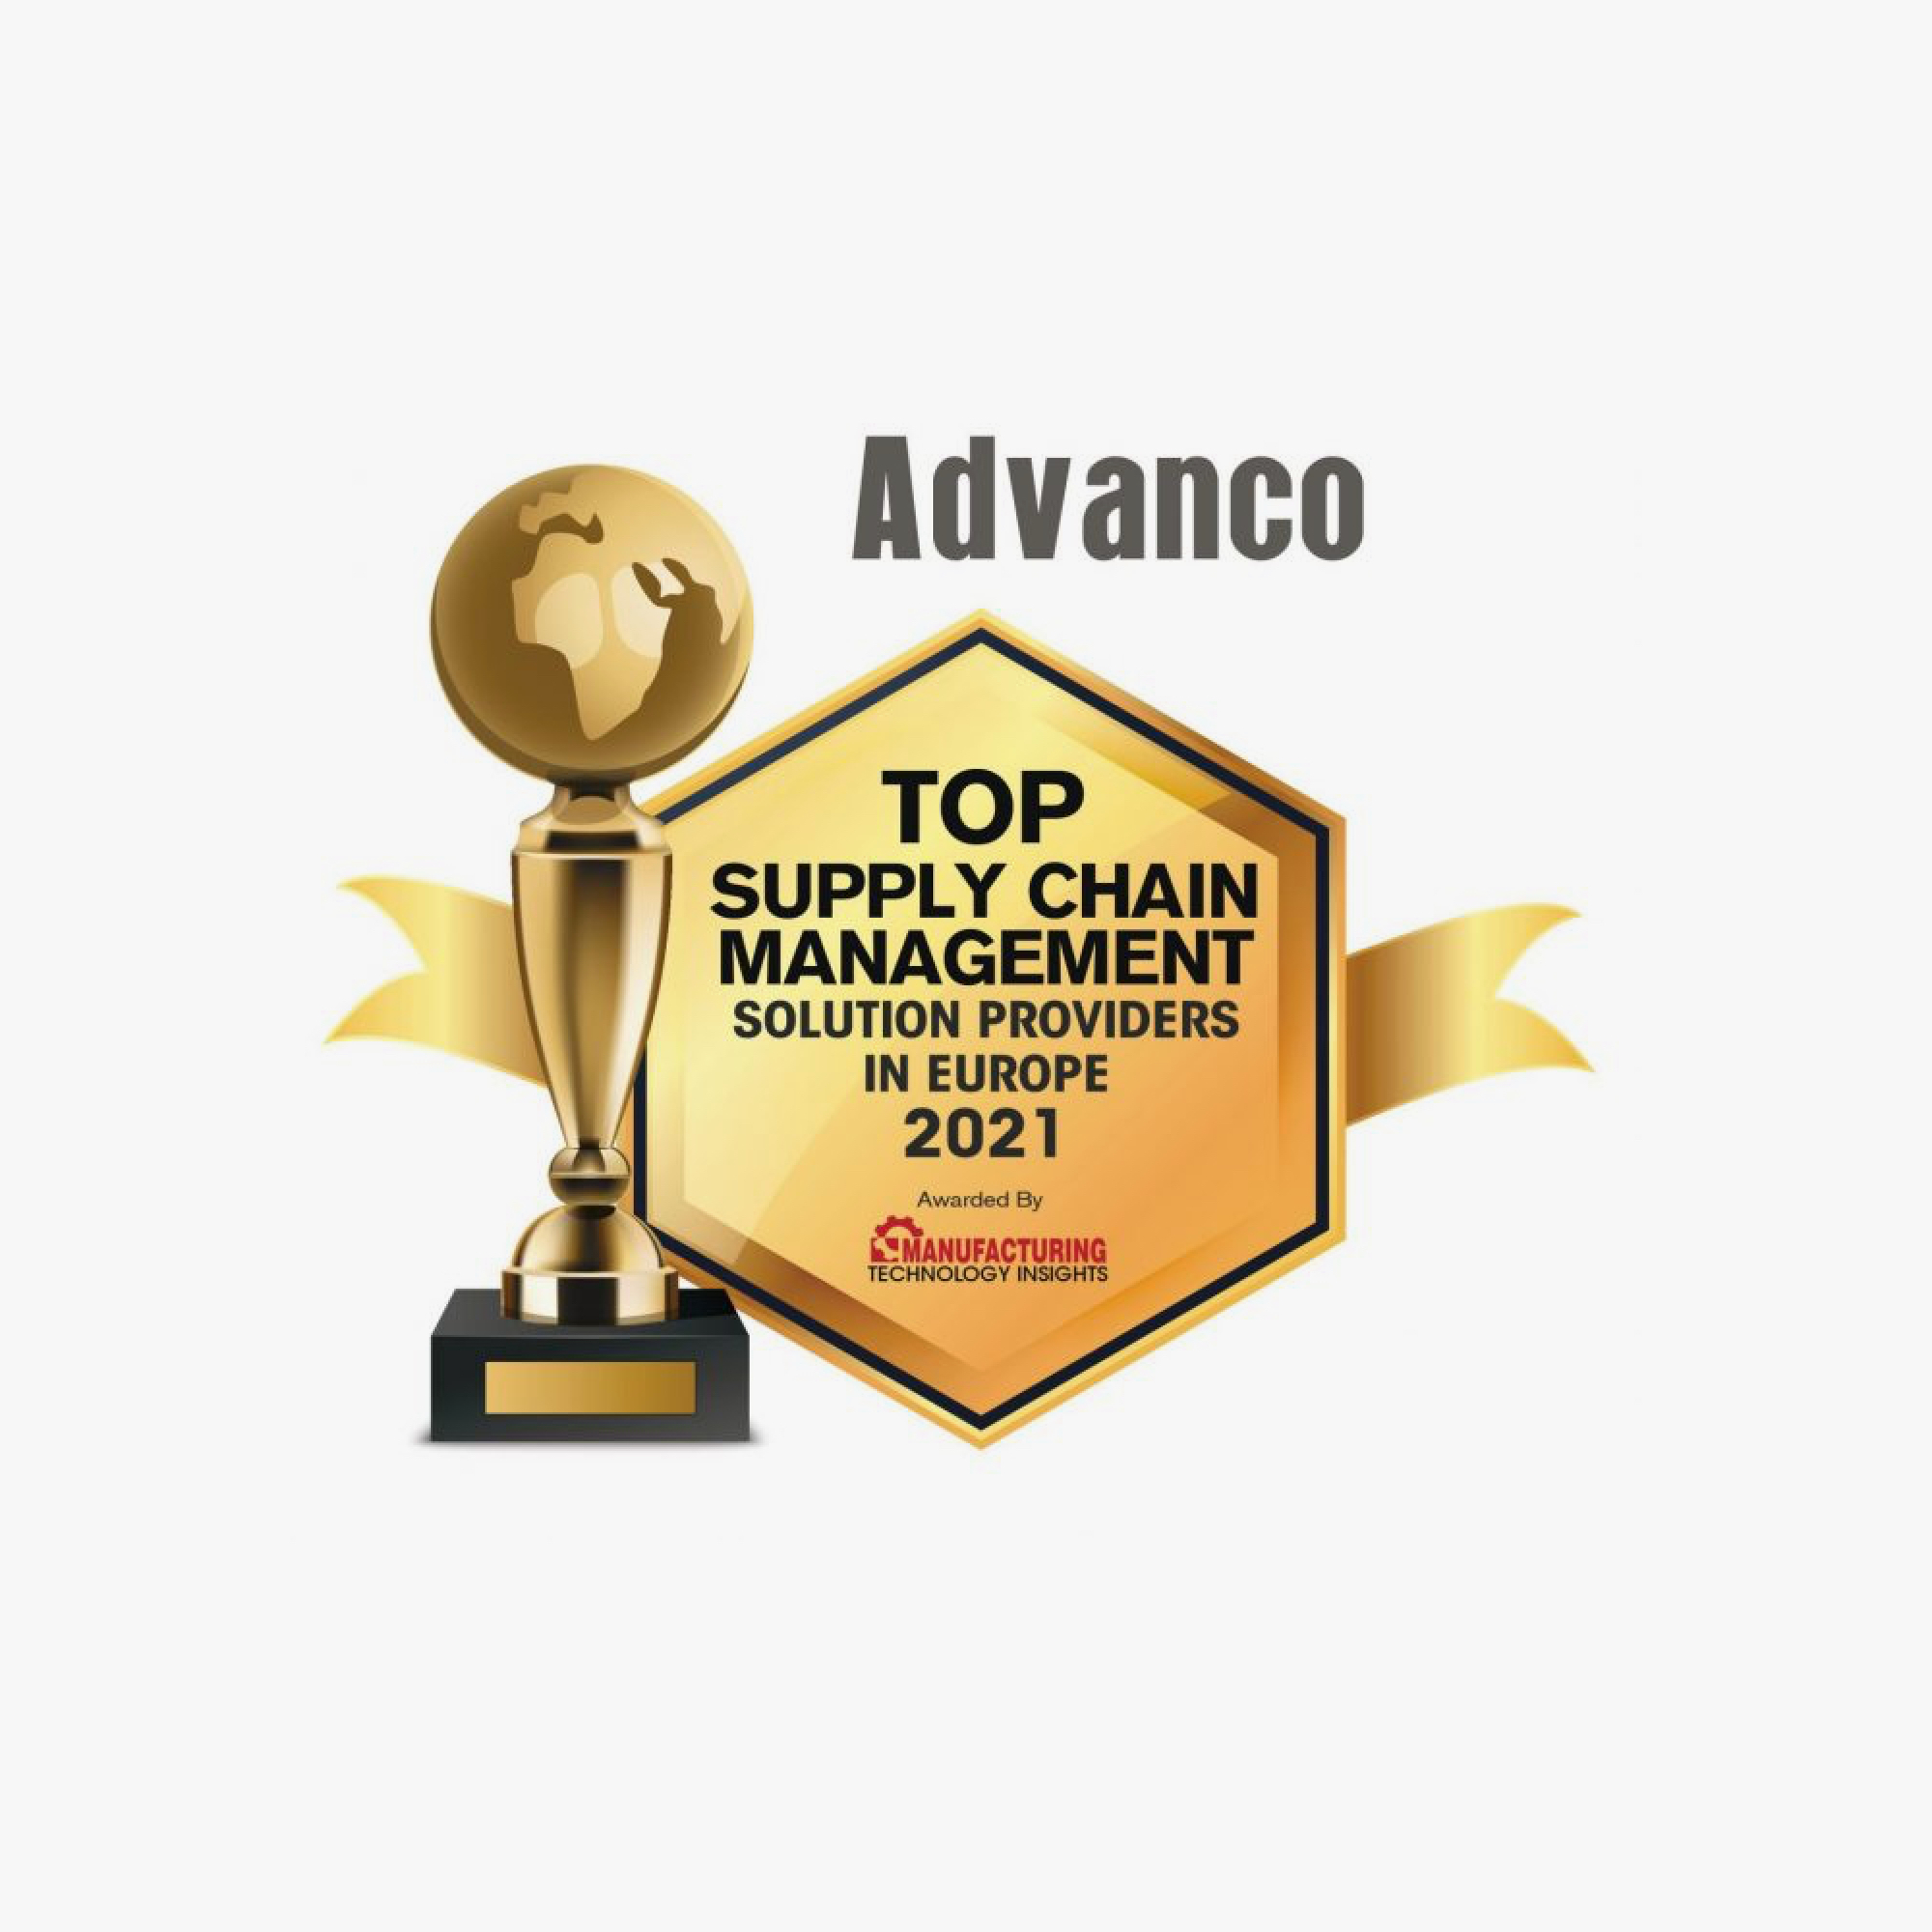 Advanco is one of the « Top Supply Chain Management Solution Providers » in Europe 2021